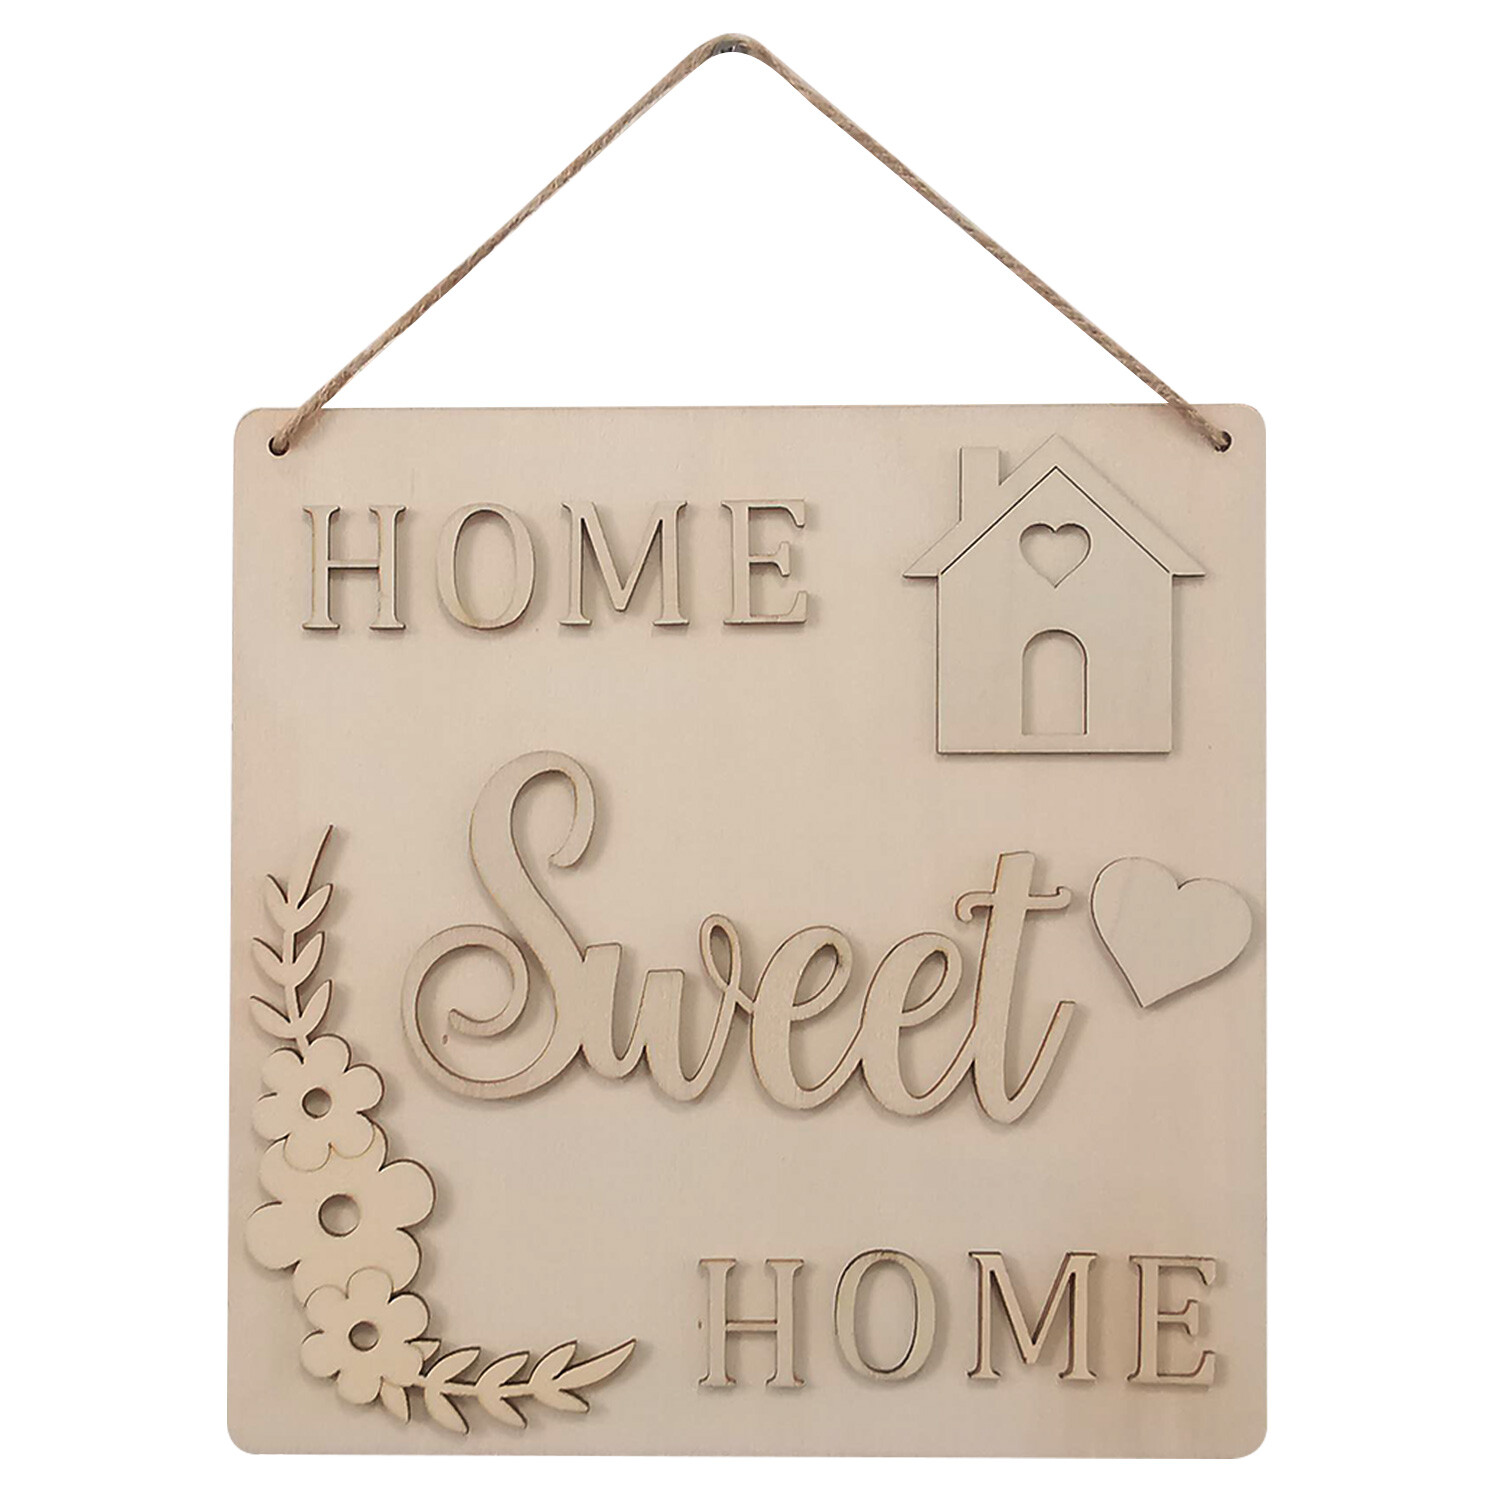 Hanging Wooden Home Sweet Home Sign Image